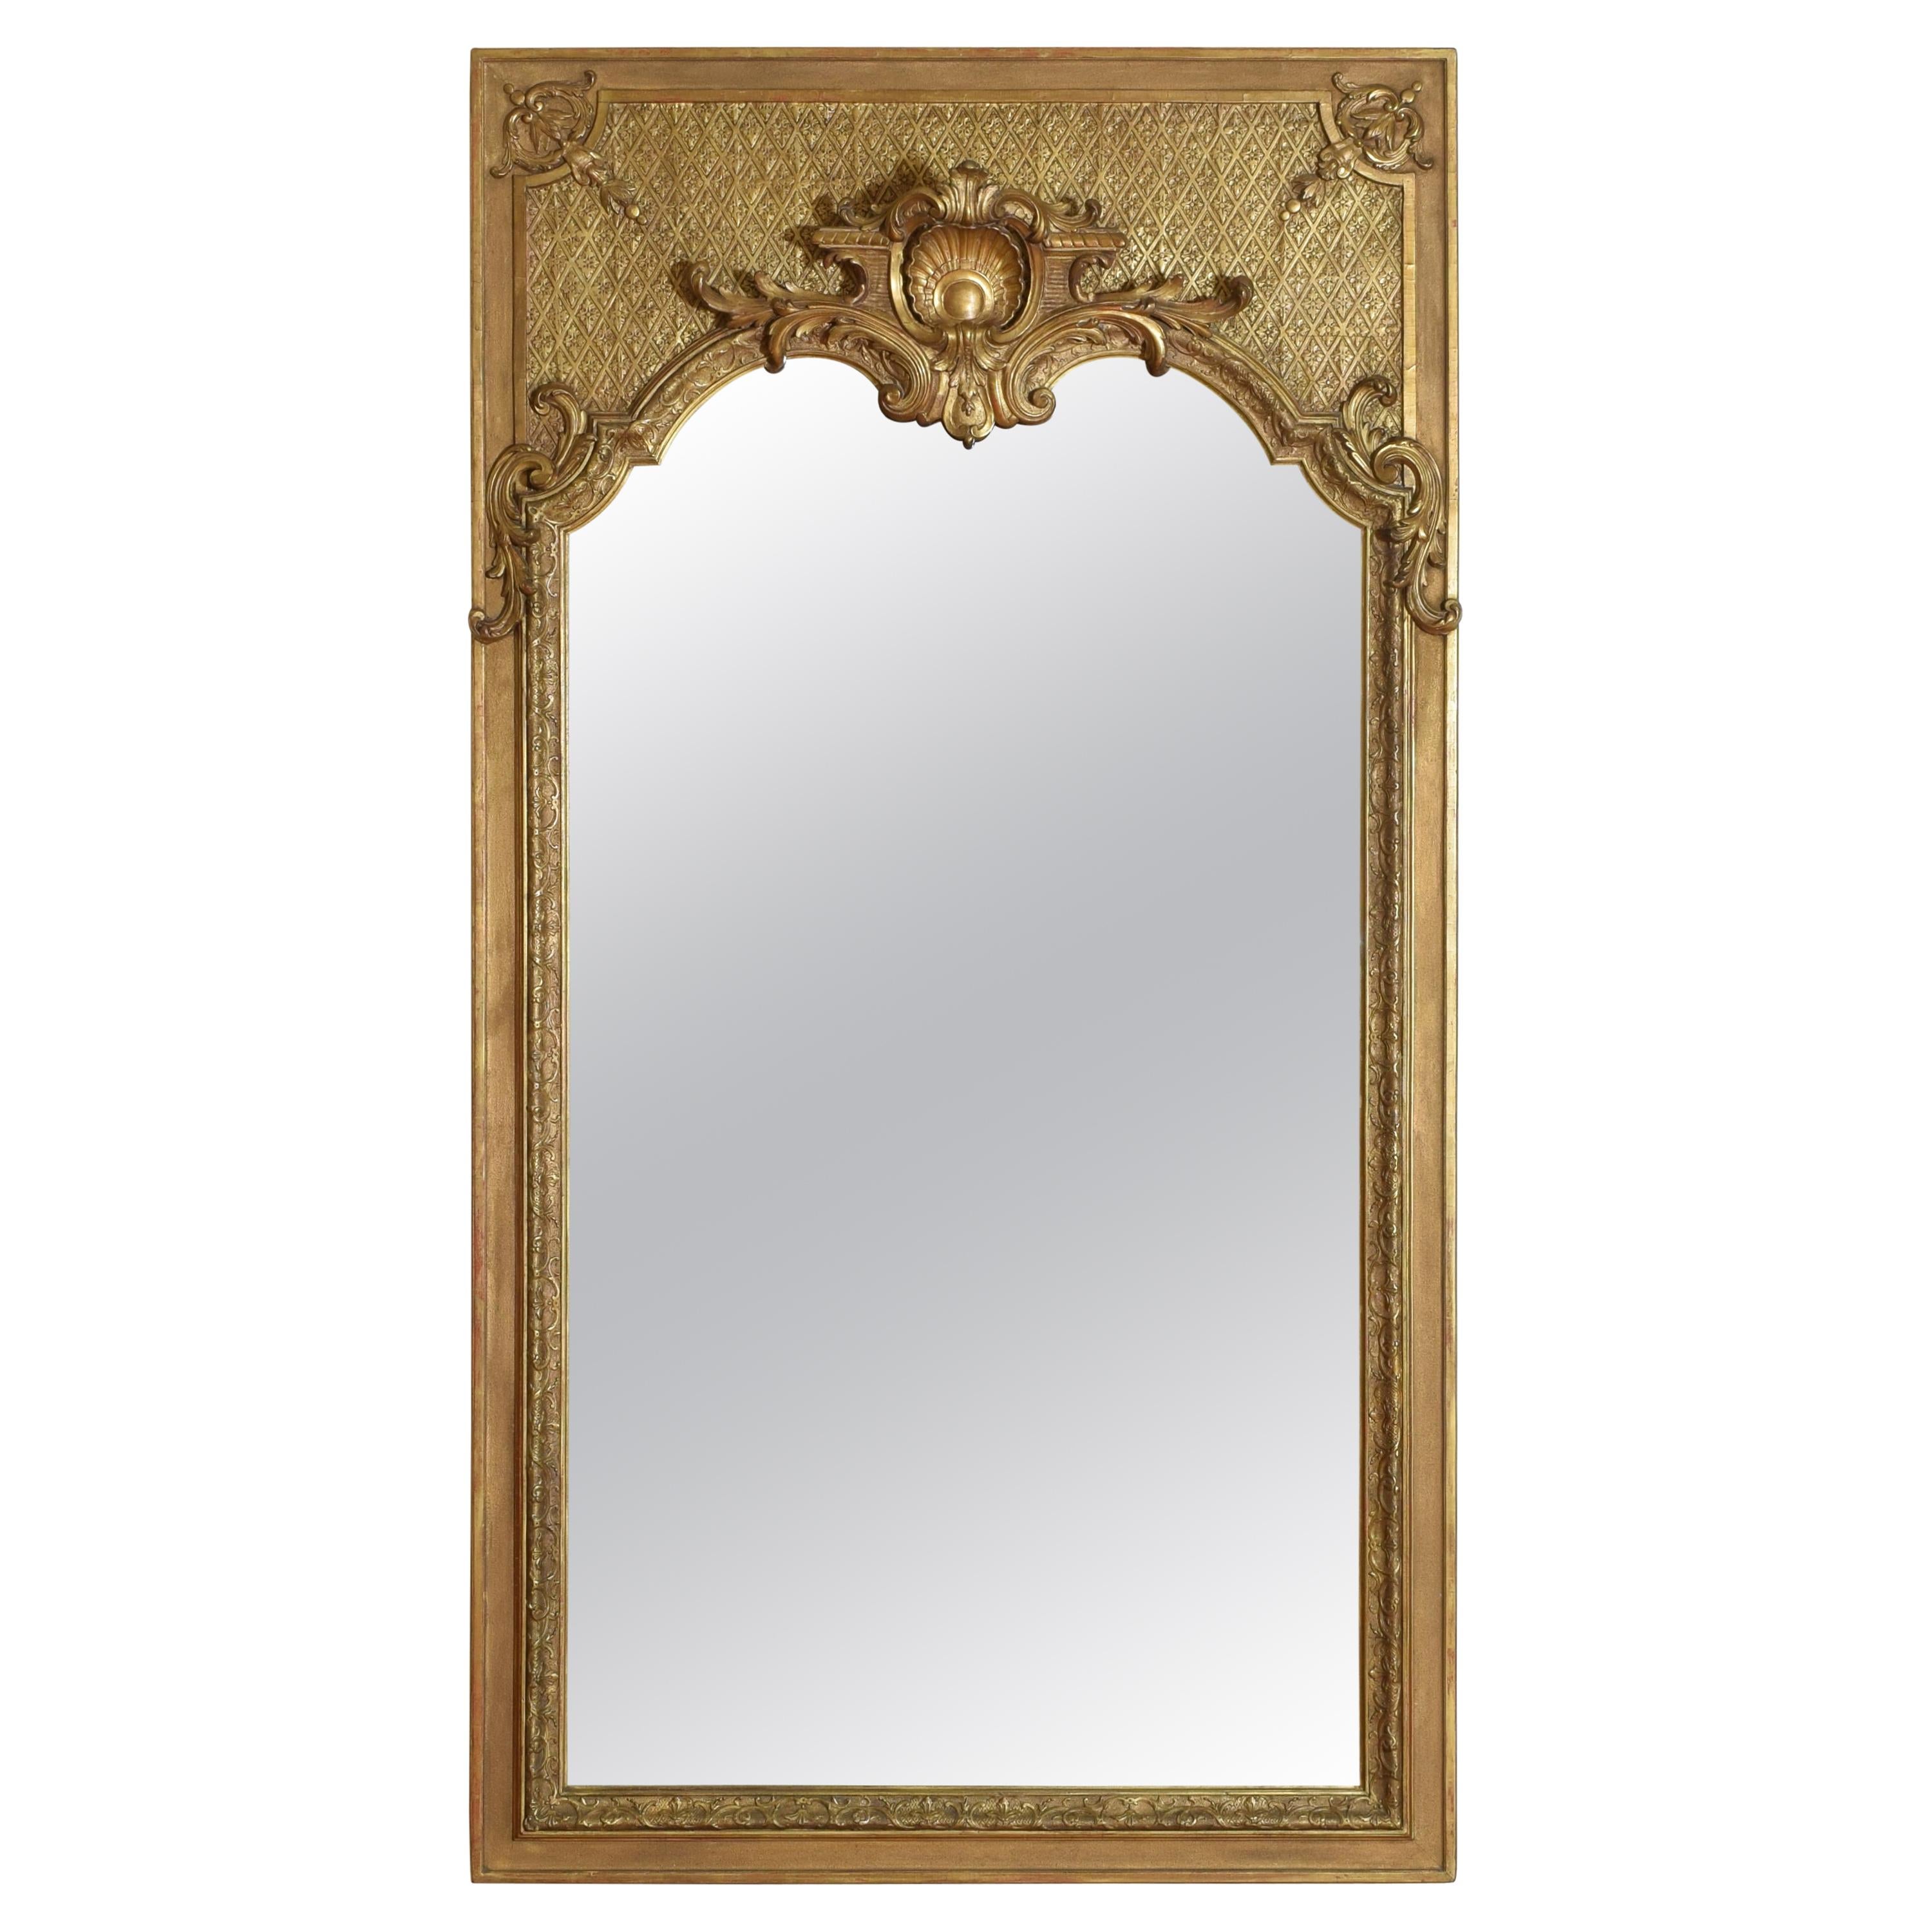 Large French Regence Style Carved Giltwood and Gilt-Gesso Mirror, 3rdq 19th cen.